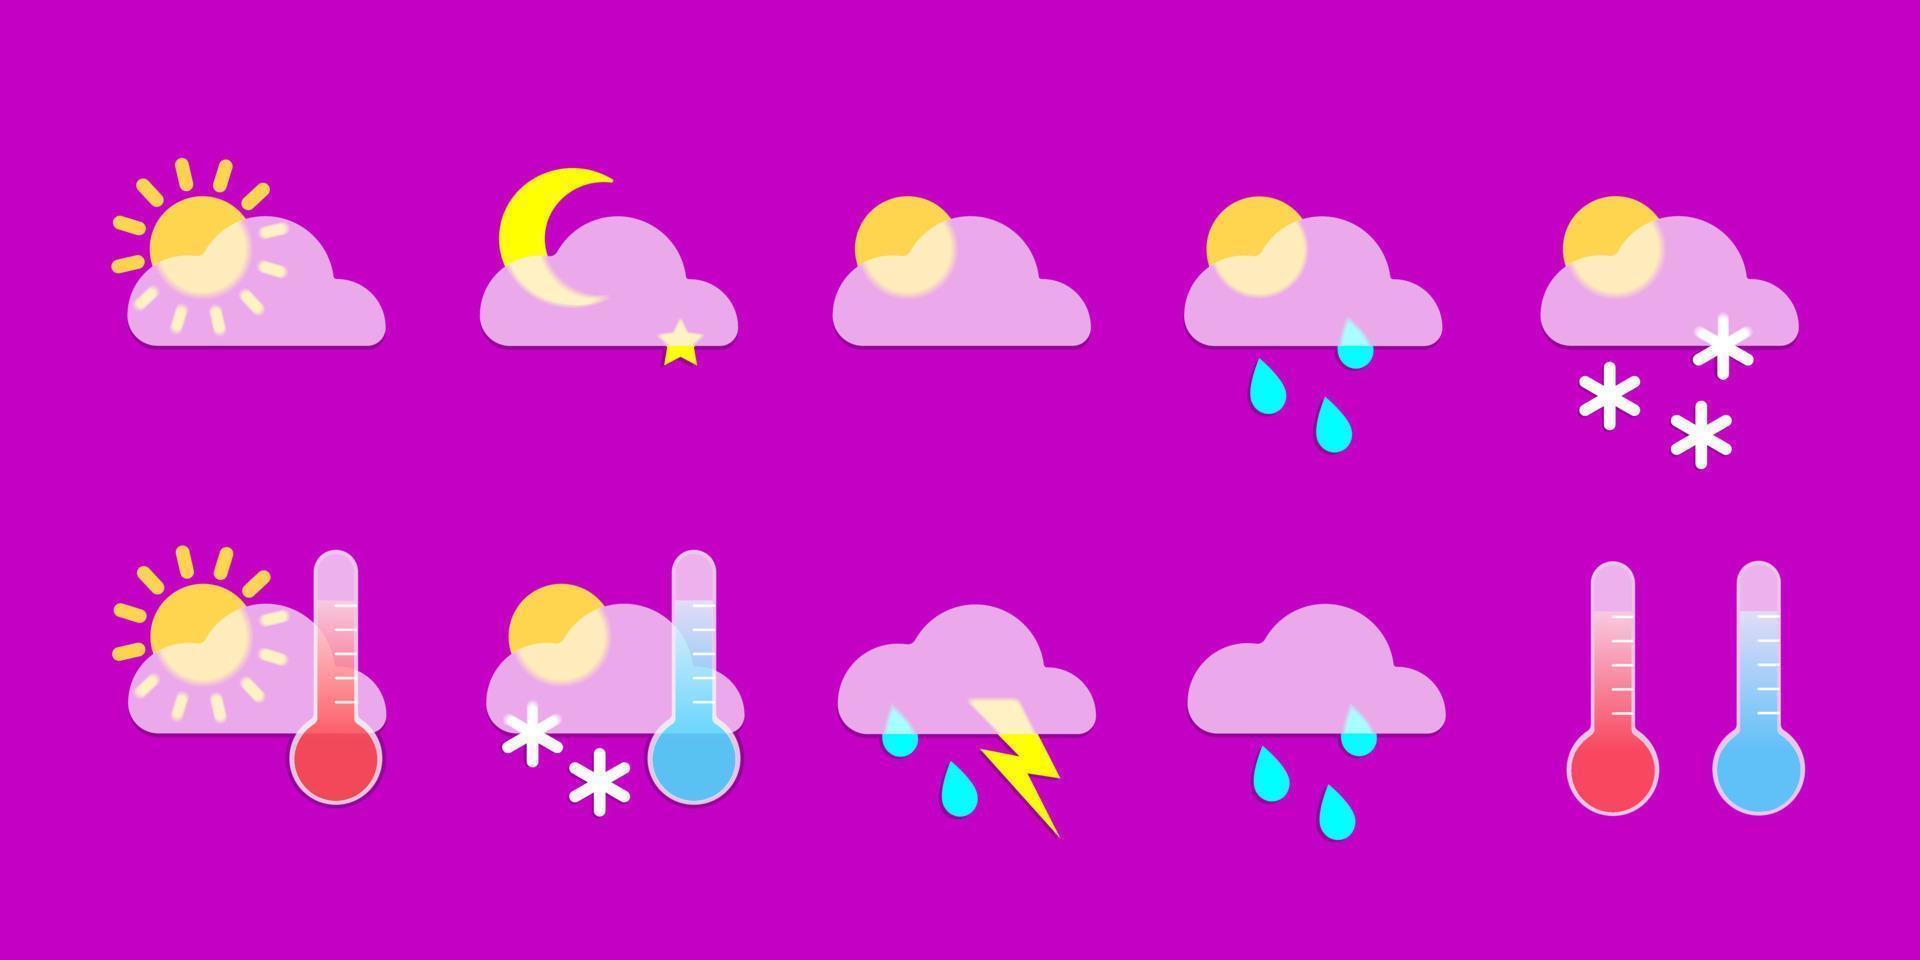 Set weather icons in glassmorphism style. Vector stock illustration.